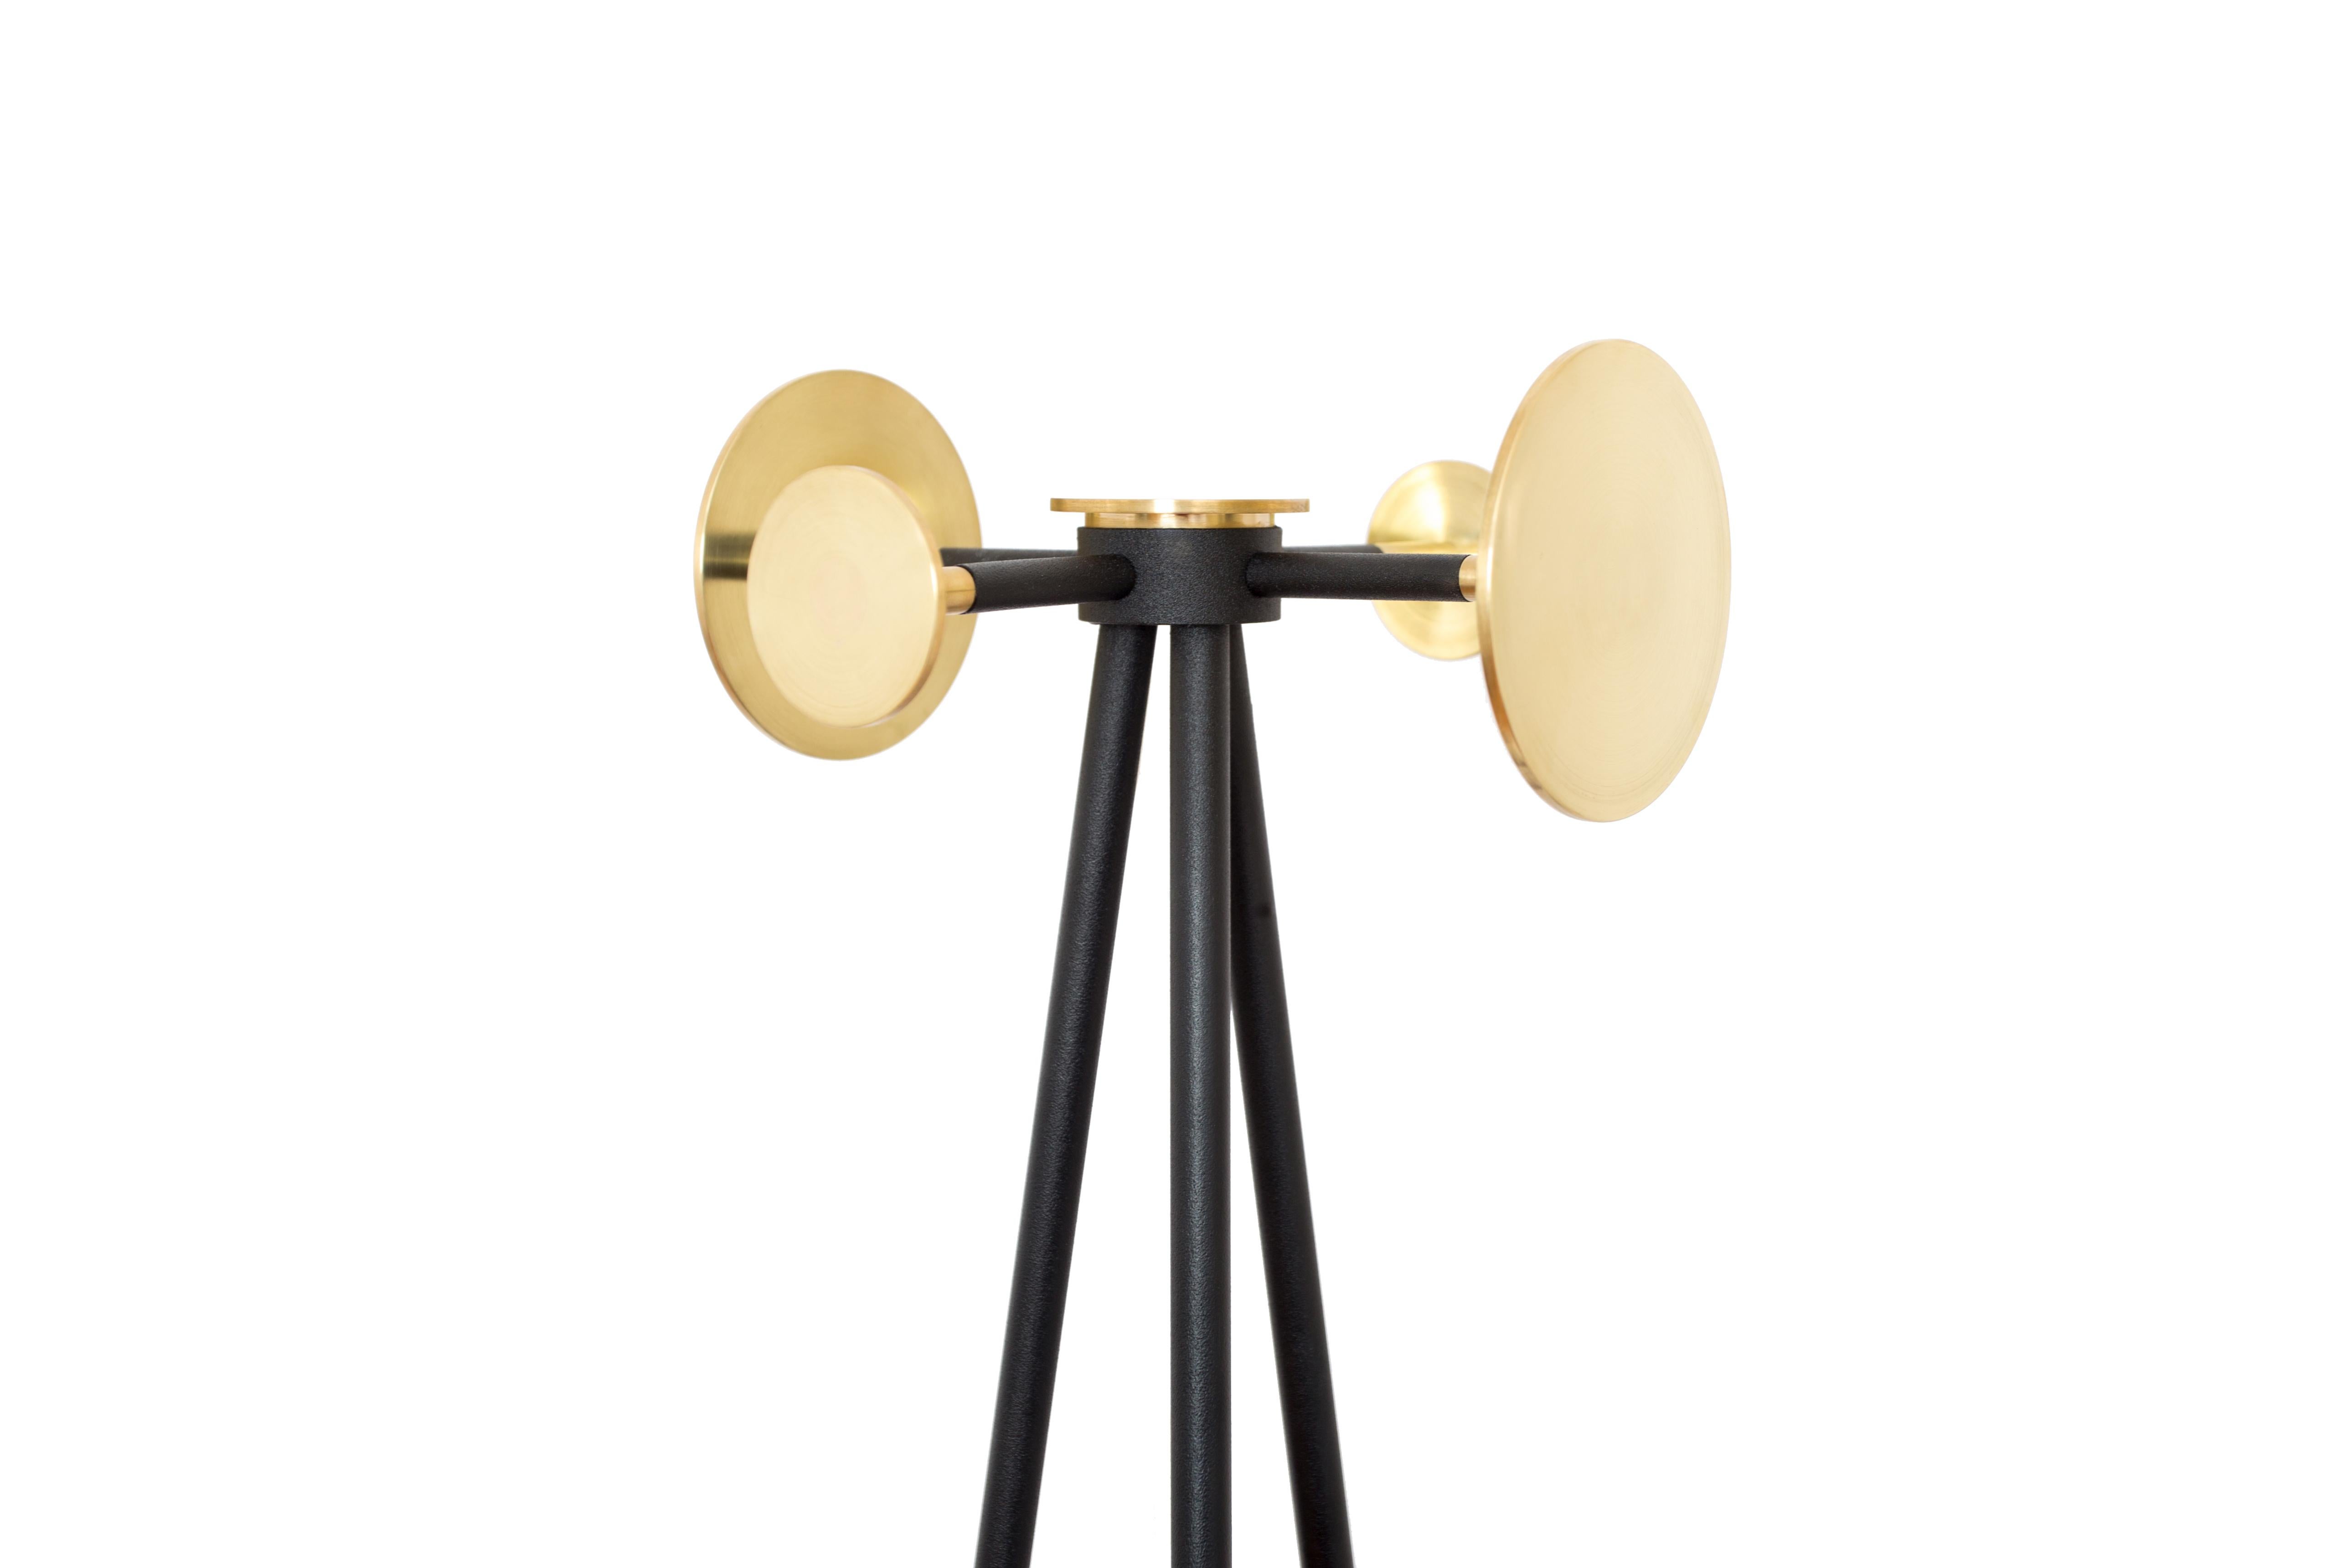 Coat and Umbrella Stand, Brass and Metal, Contemporary Mexican Design For Sale 1